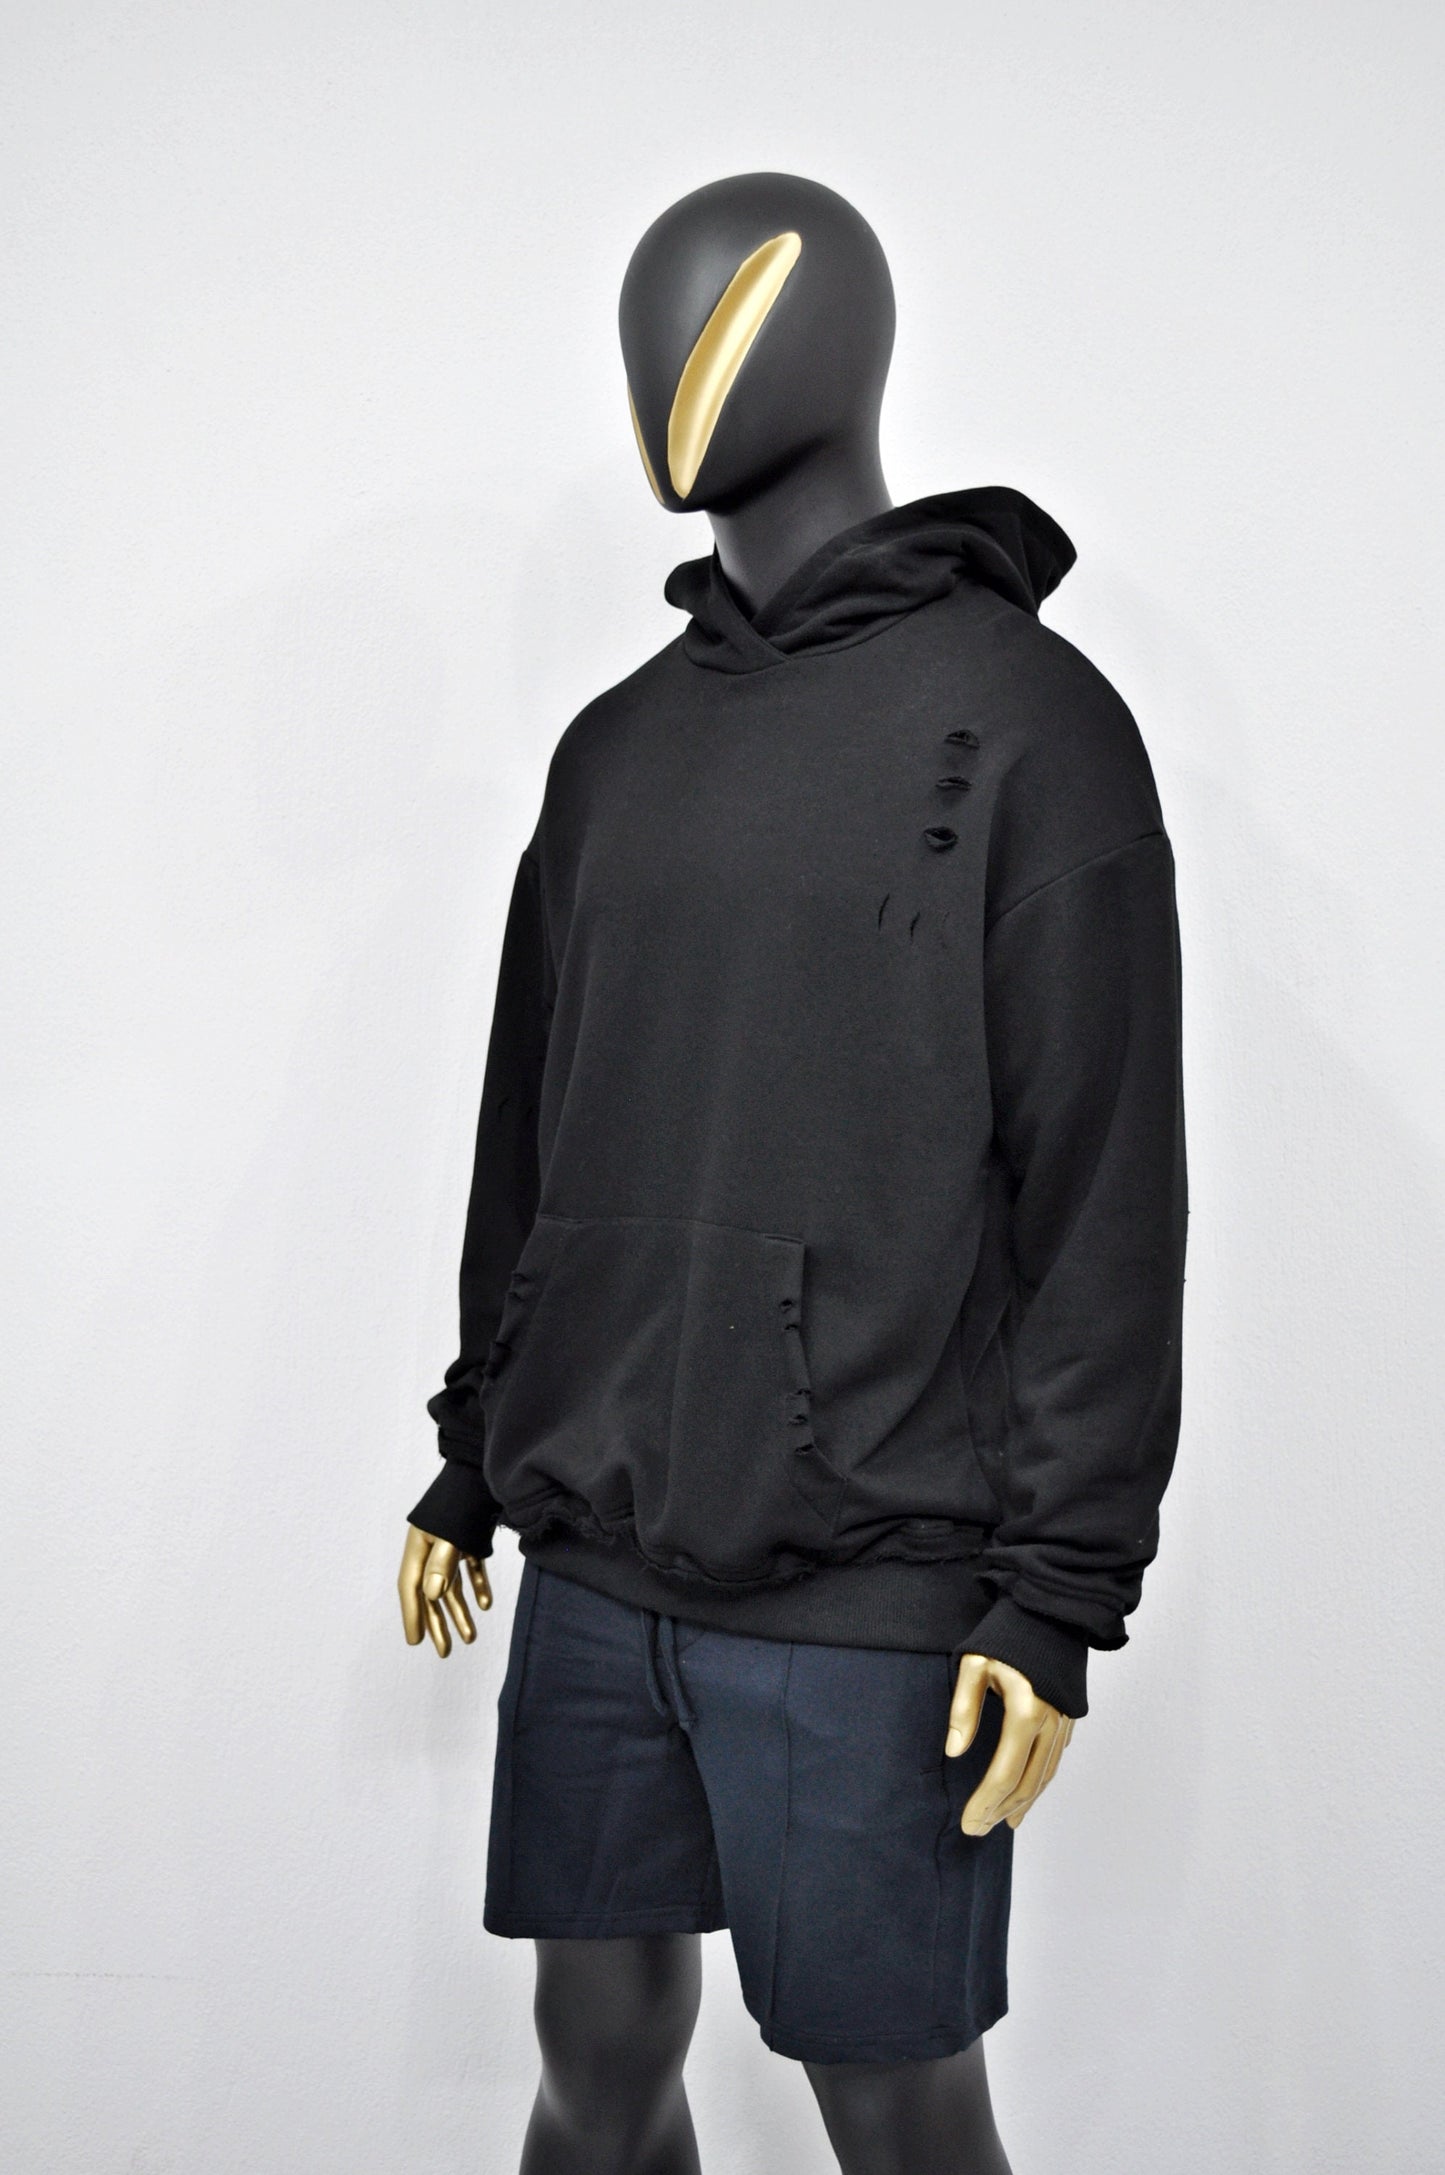 XS-8XL Men's Oversized Destroyed Rip Fleece Jumper Hoodie,Drop Shoulder,Pullover,Cyber SteamPunk,Futuristic-Apocalyptic Dystopian-BB072